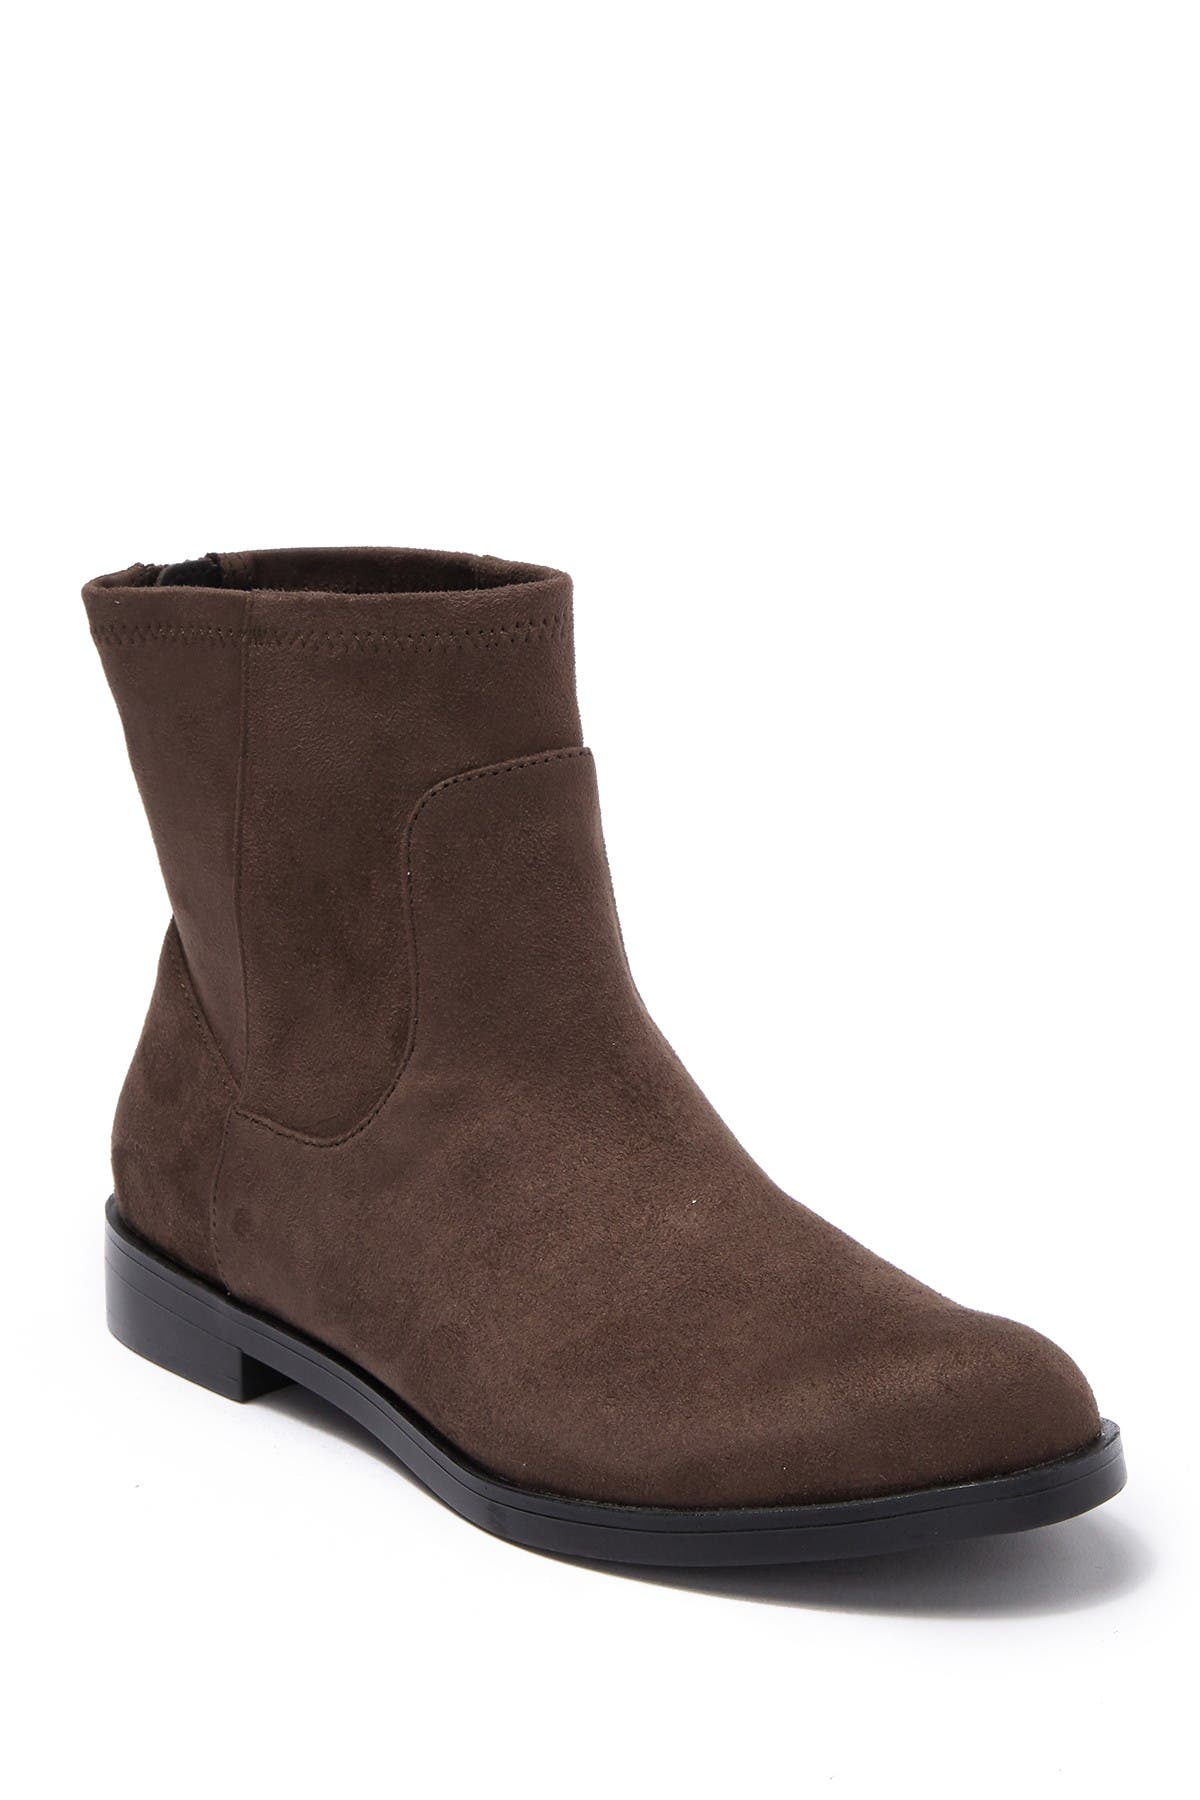 kenneth cole reaction boots